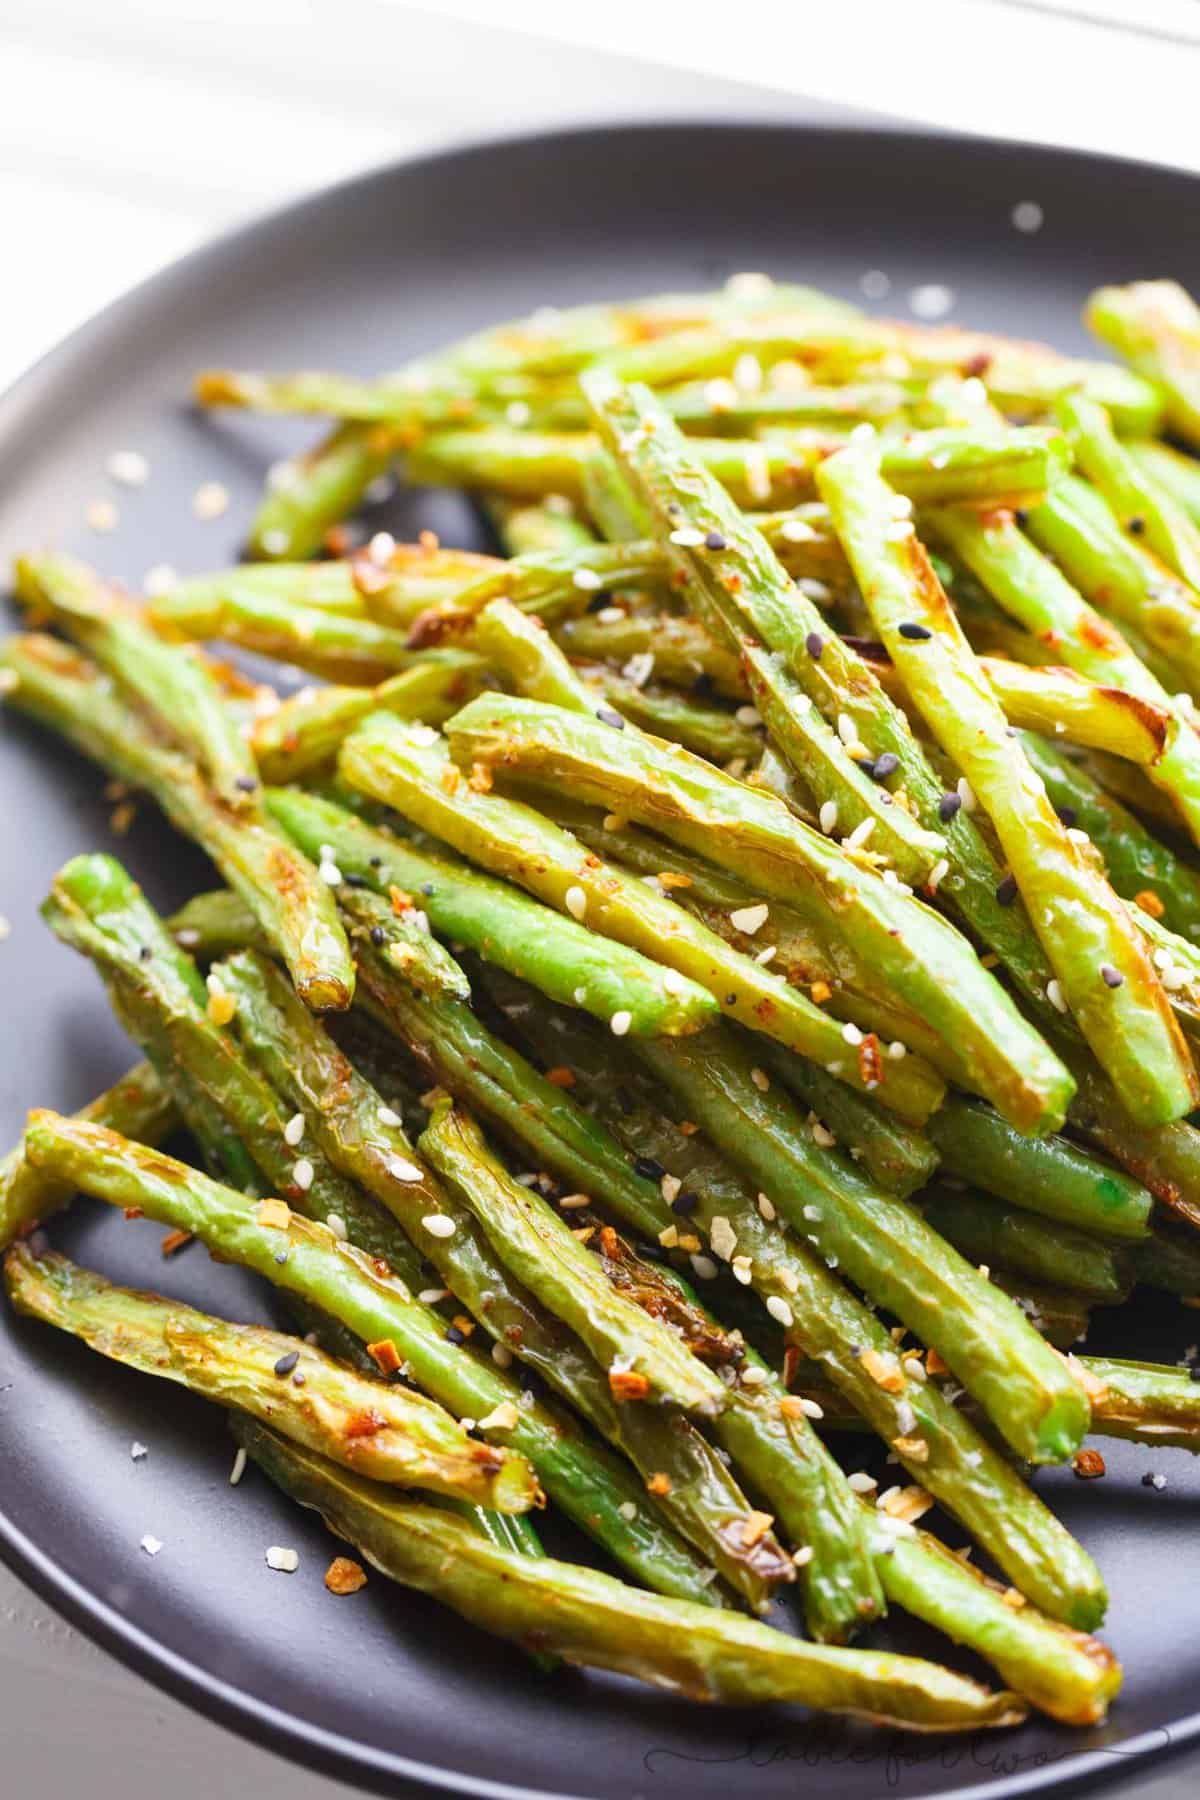 These garlic roasted green beans are the perfect side dish addition to any table and meal! They will convert you to love green beans if you don't already!